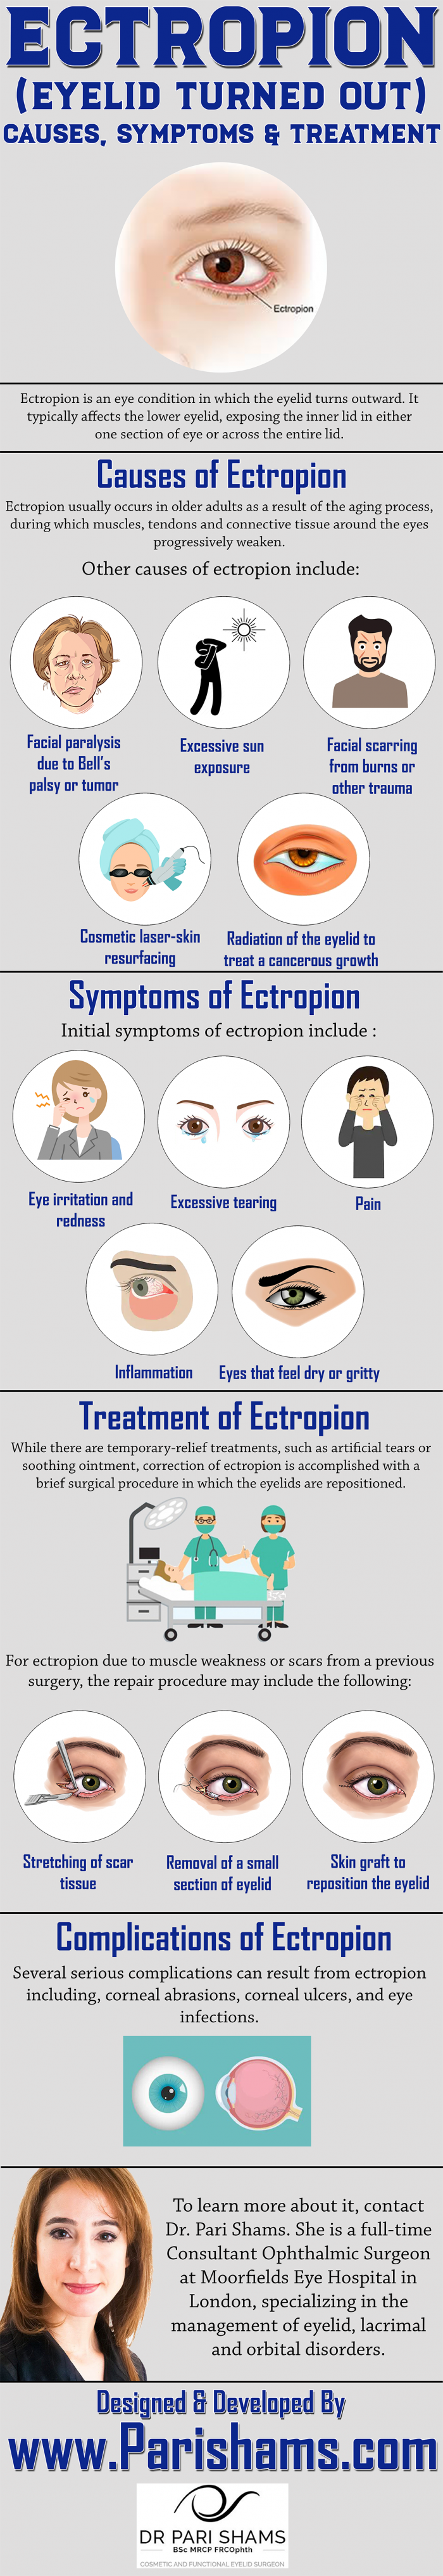 ECTROPION (Eyelid Turned Out) – Causes, Symptoms & Treatment